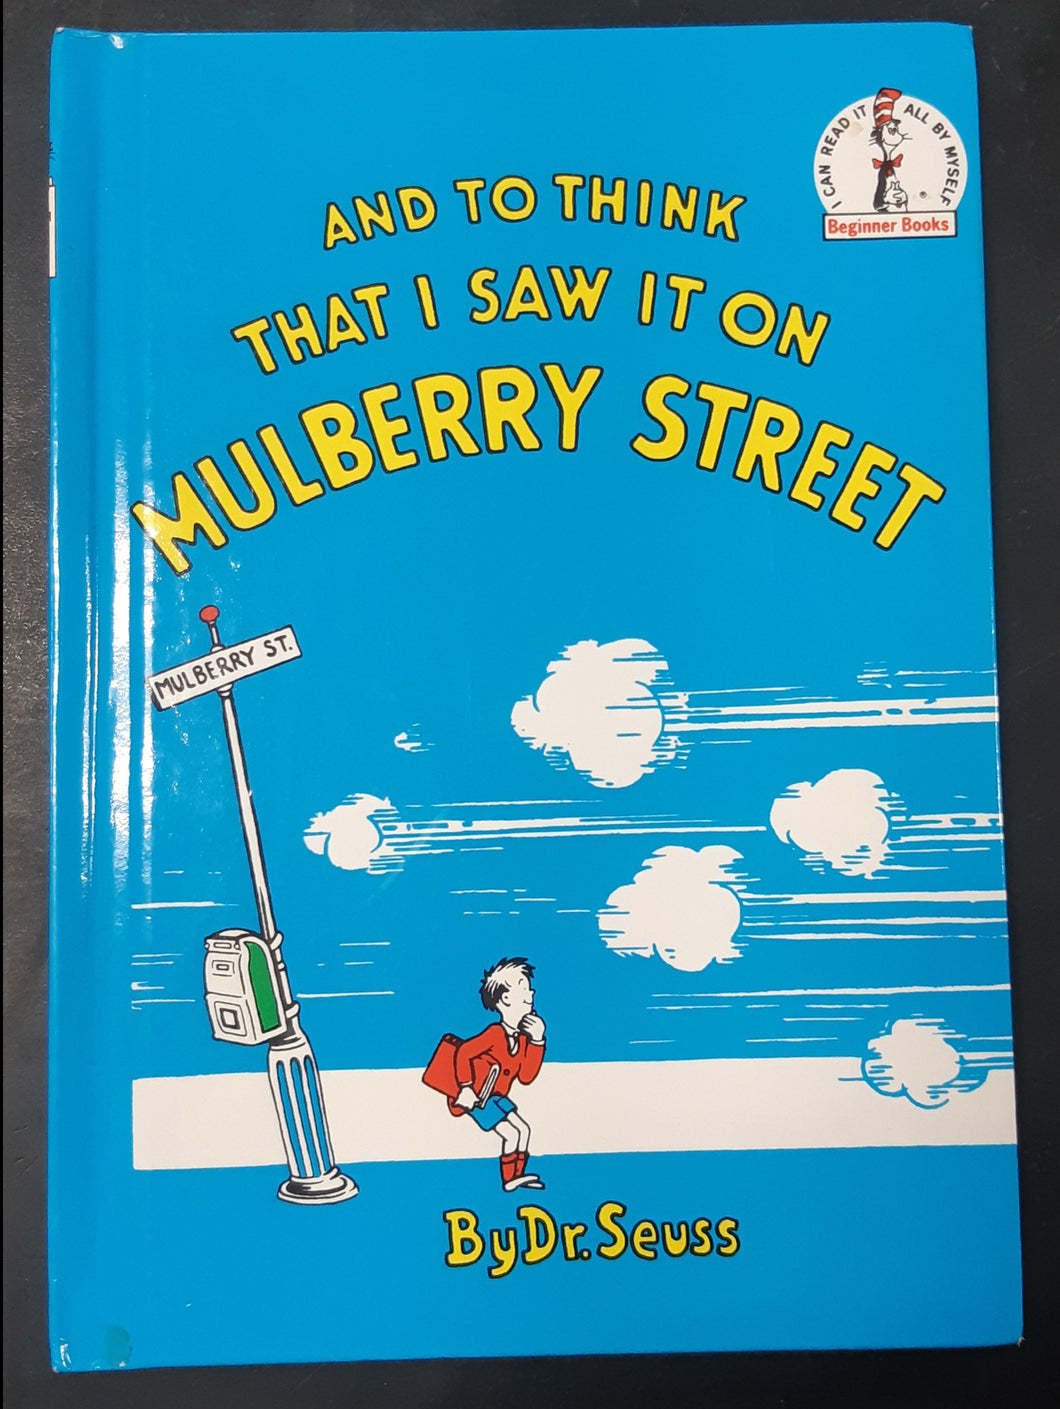 Dr. Seuss - And to Think I Saw It On Mulberry Street - Hardcover - Book Club Edition - 1964